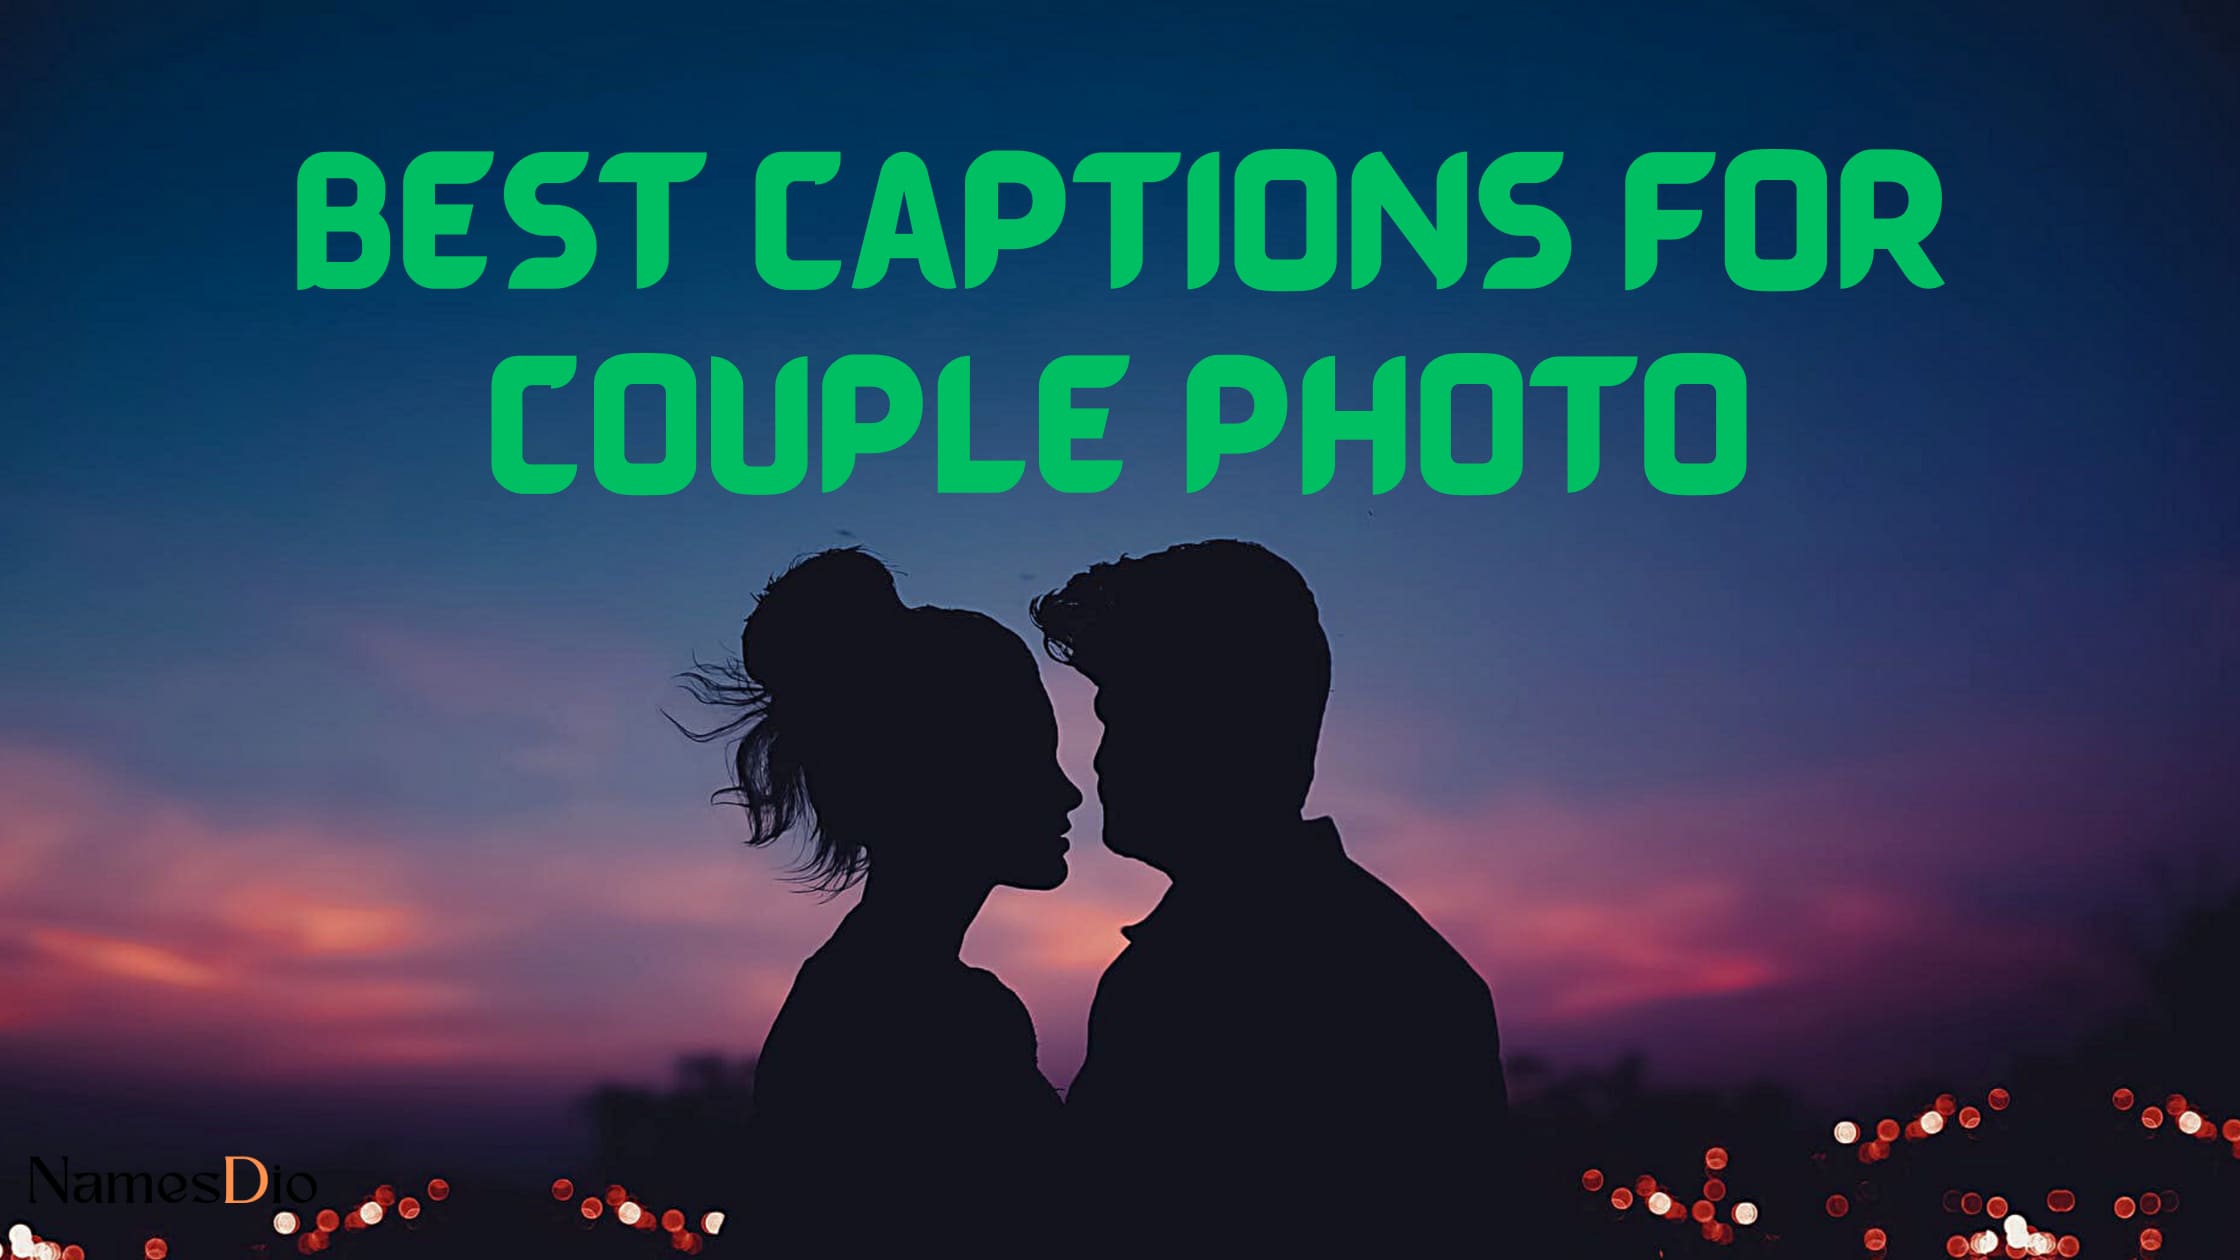 Best-Captions-for-Couple-Photo